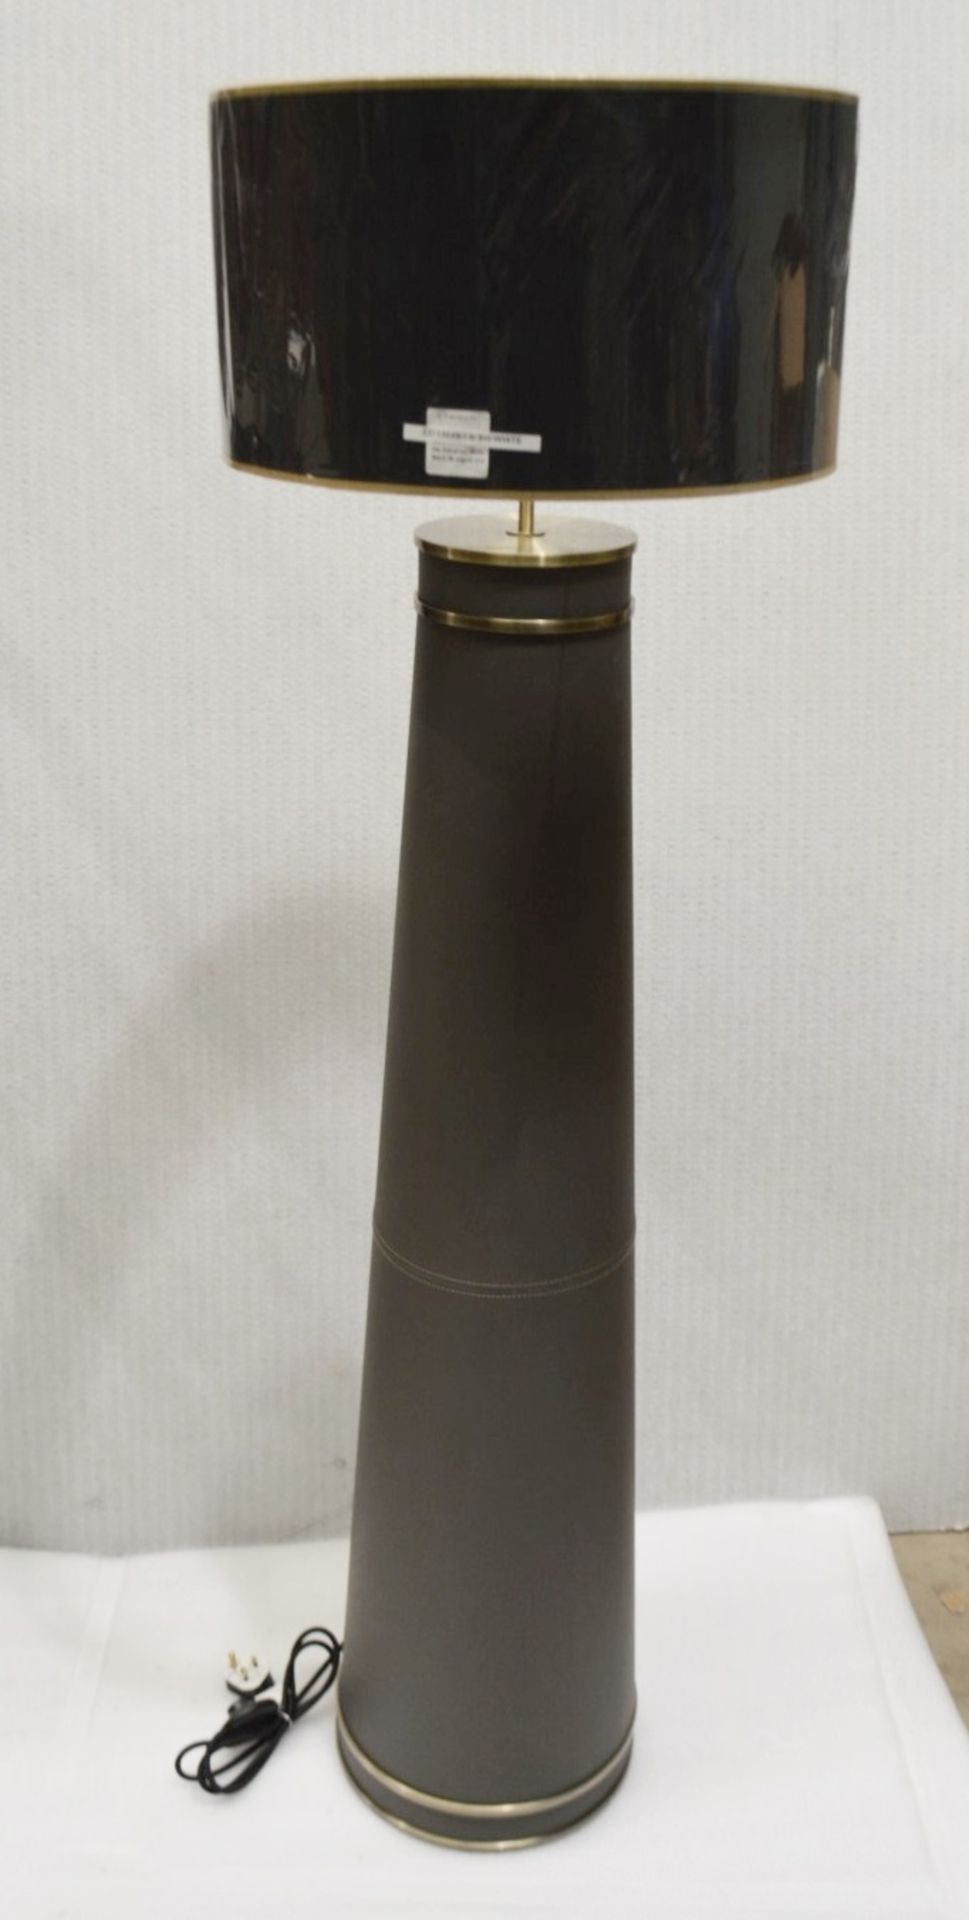 1 x Luxurious CHELSOM Grey Leather Covered Floor Lamp With Brass Accents - Includes A Black & Gold - Image 2 of 8